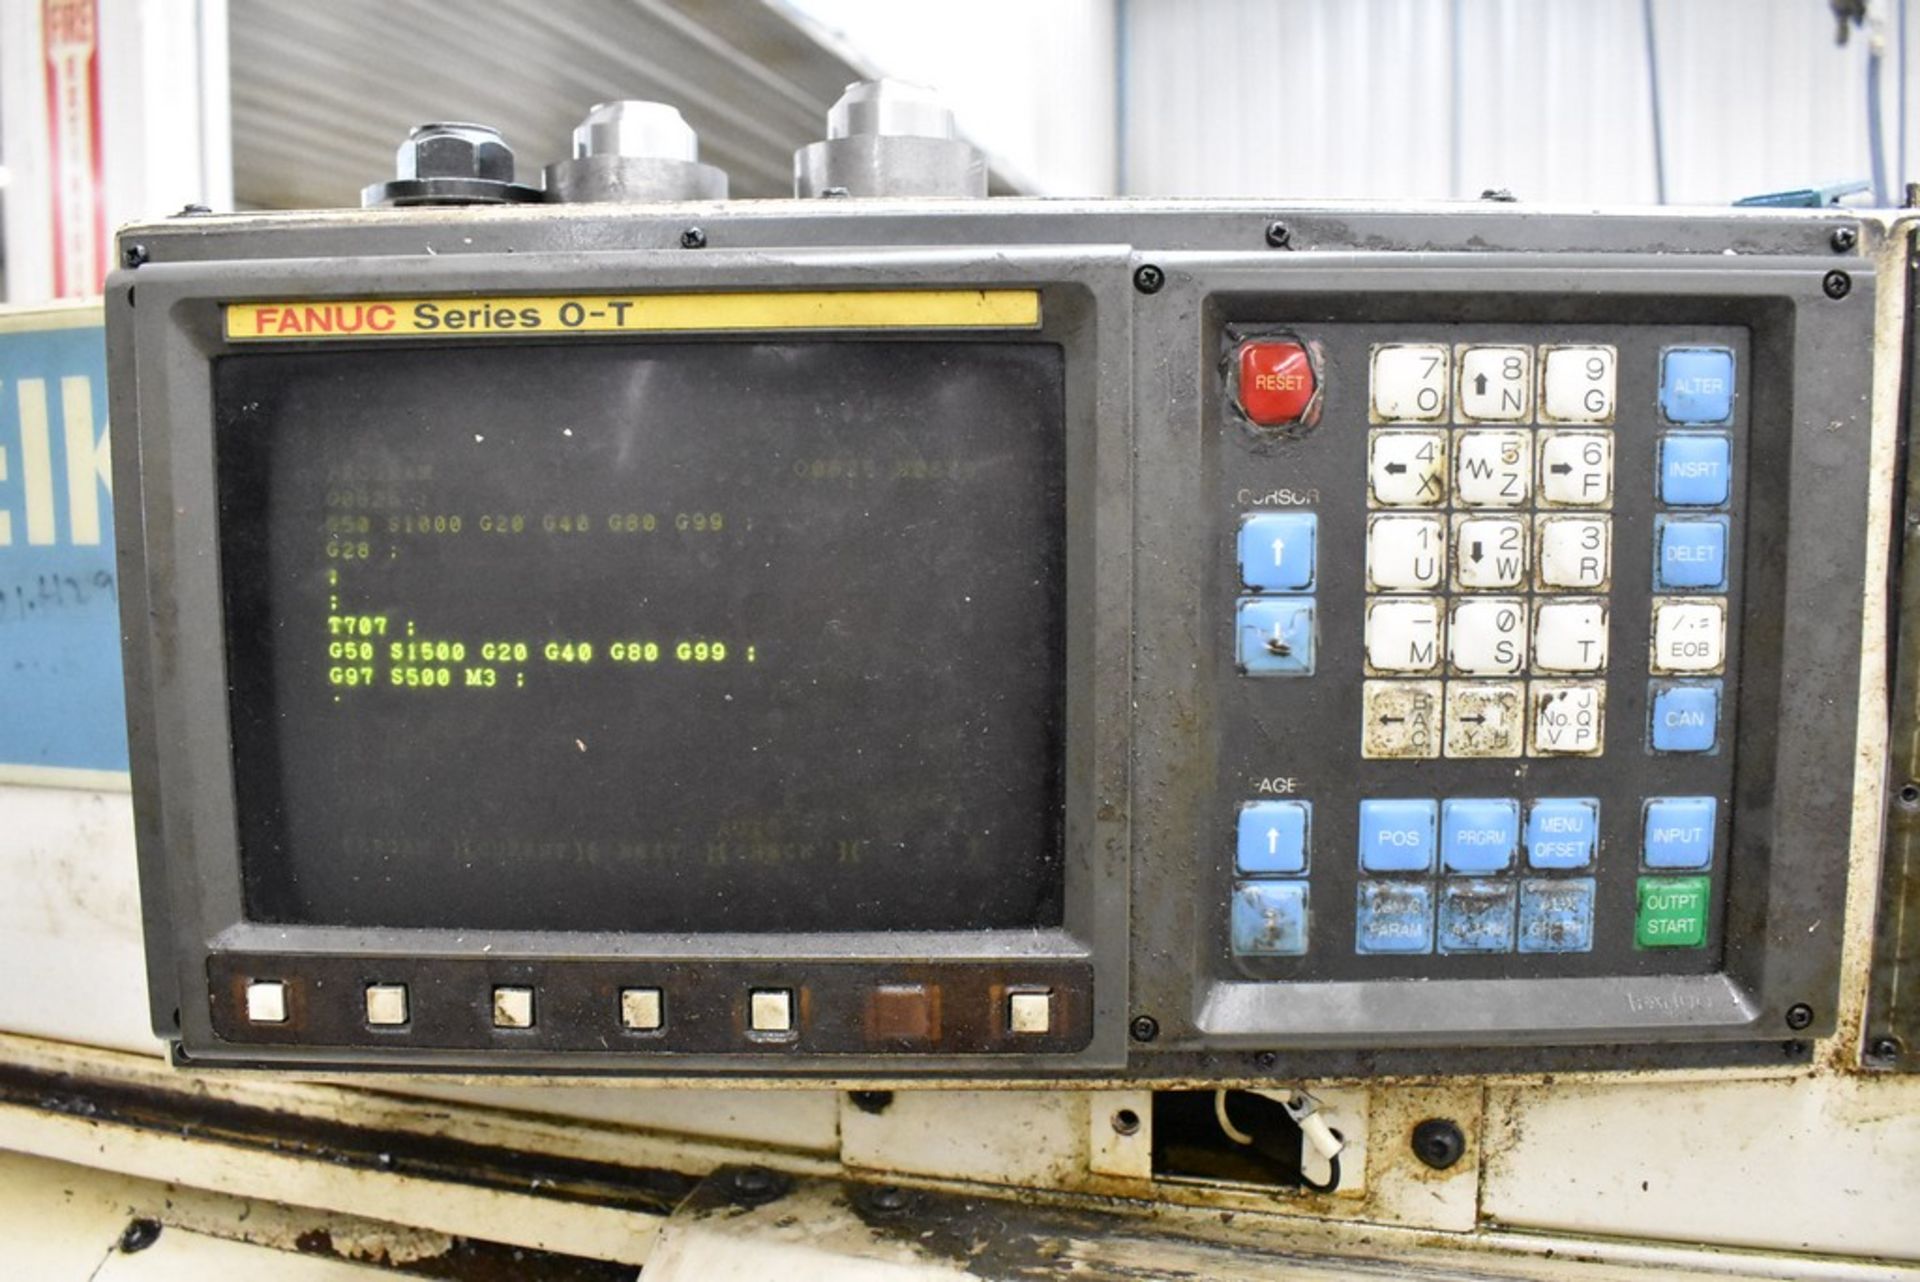 AMERA-SEIKI MODEL TC-2L CNC TURNING CENTER, S/N 78770, WITH CHUCK, TAILSTOCK, FANUC SERIES O-T - Image 5 of 17